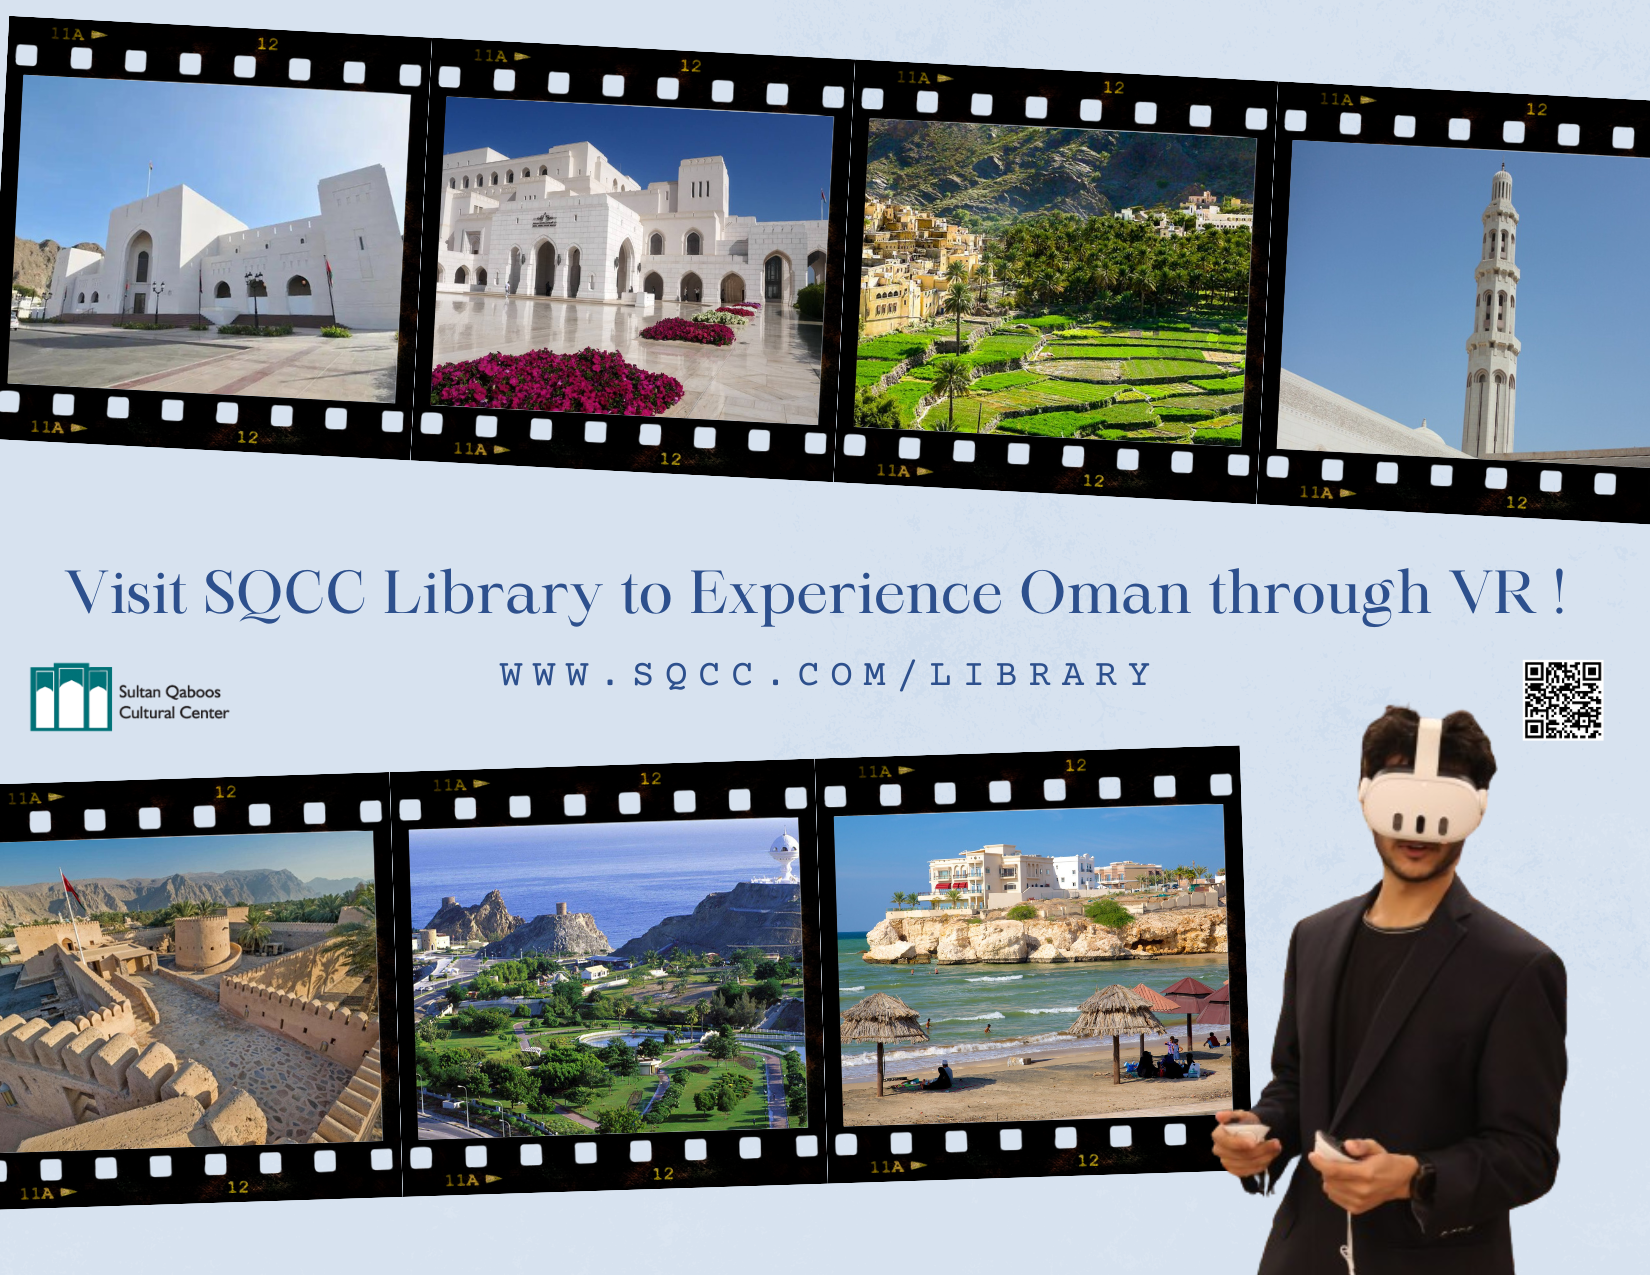 visit SQCC library for Oman VR experience!